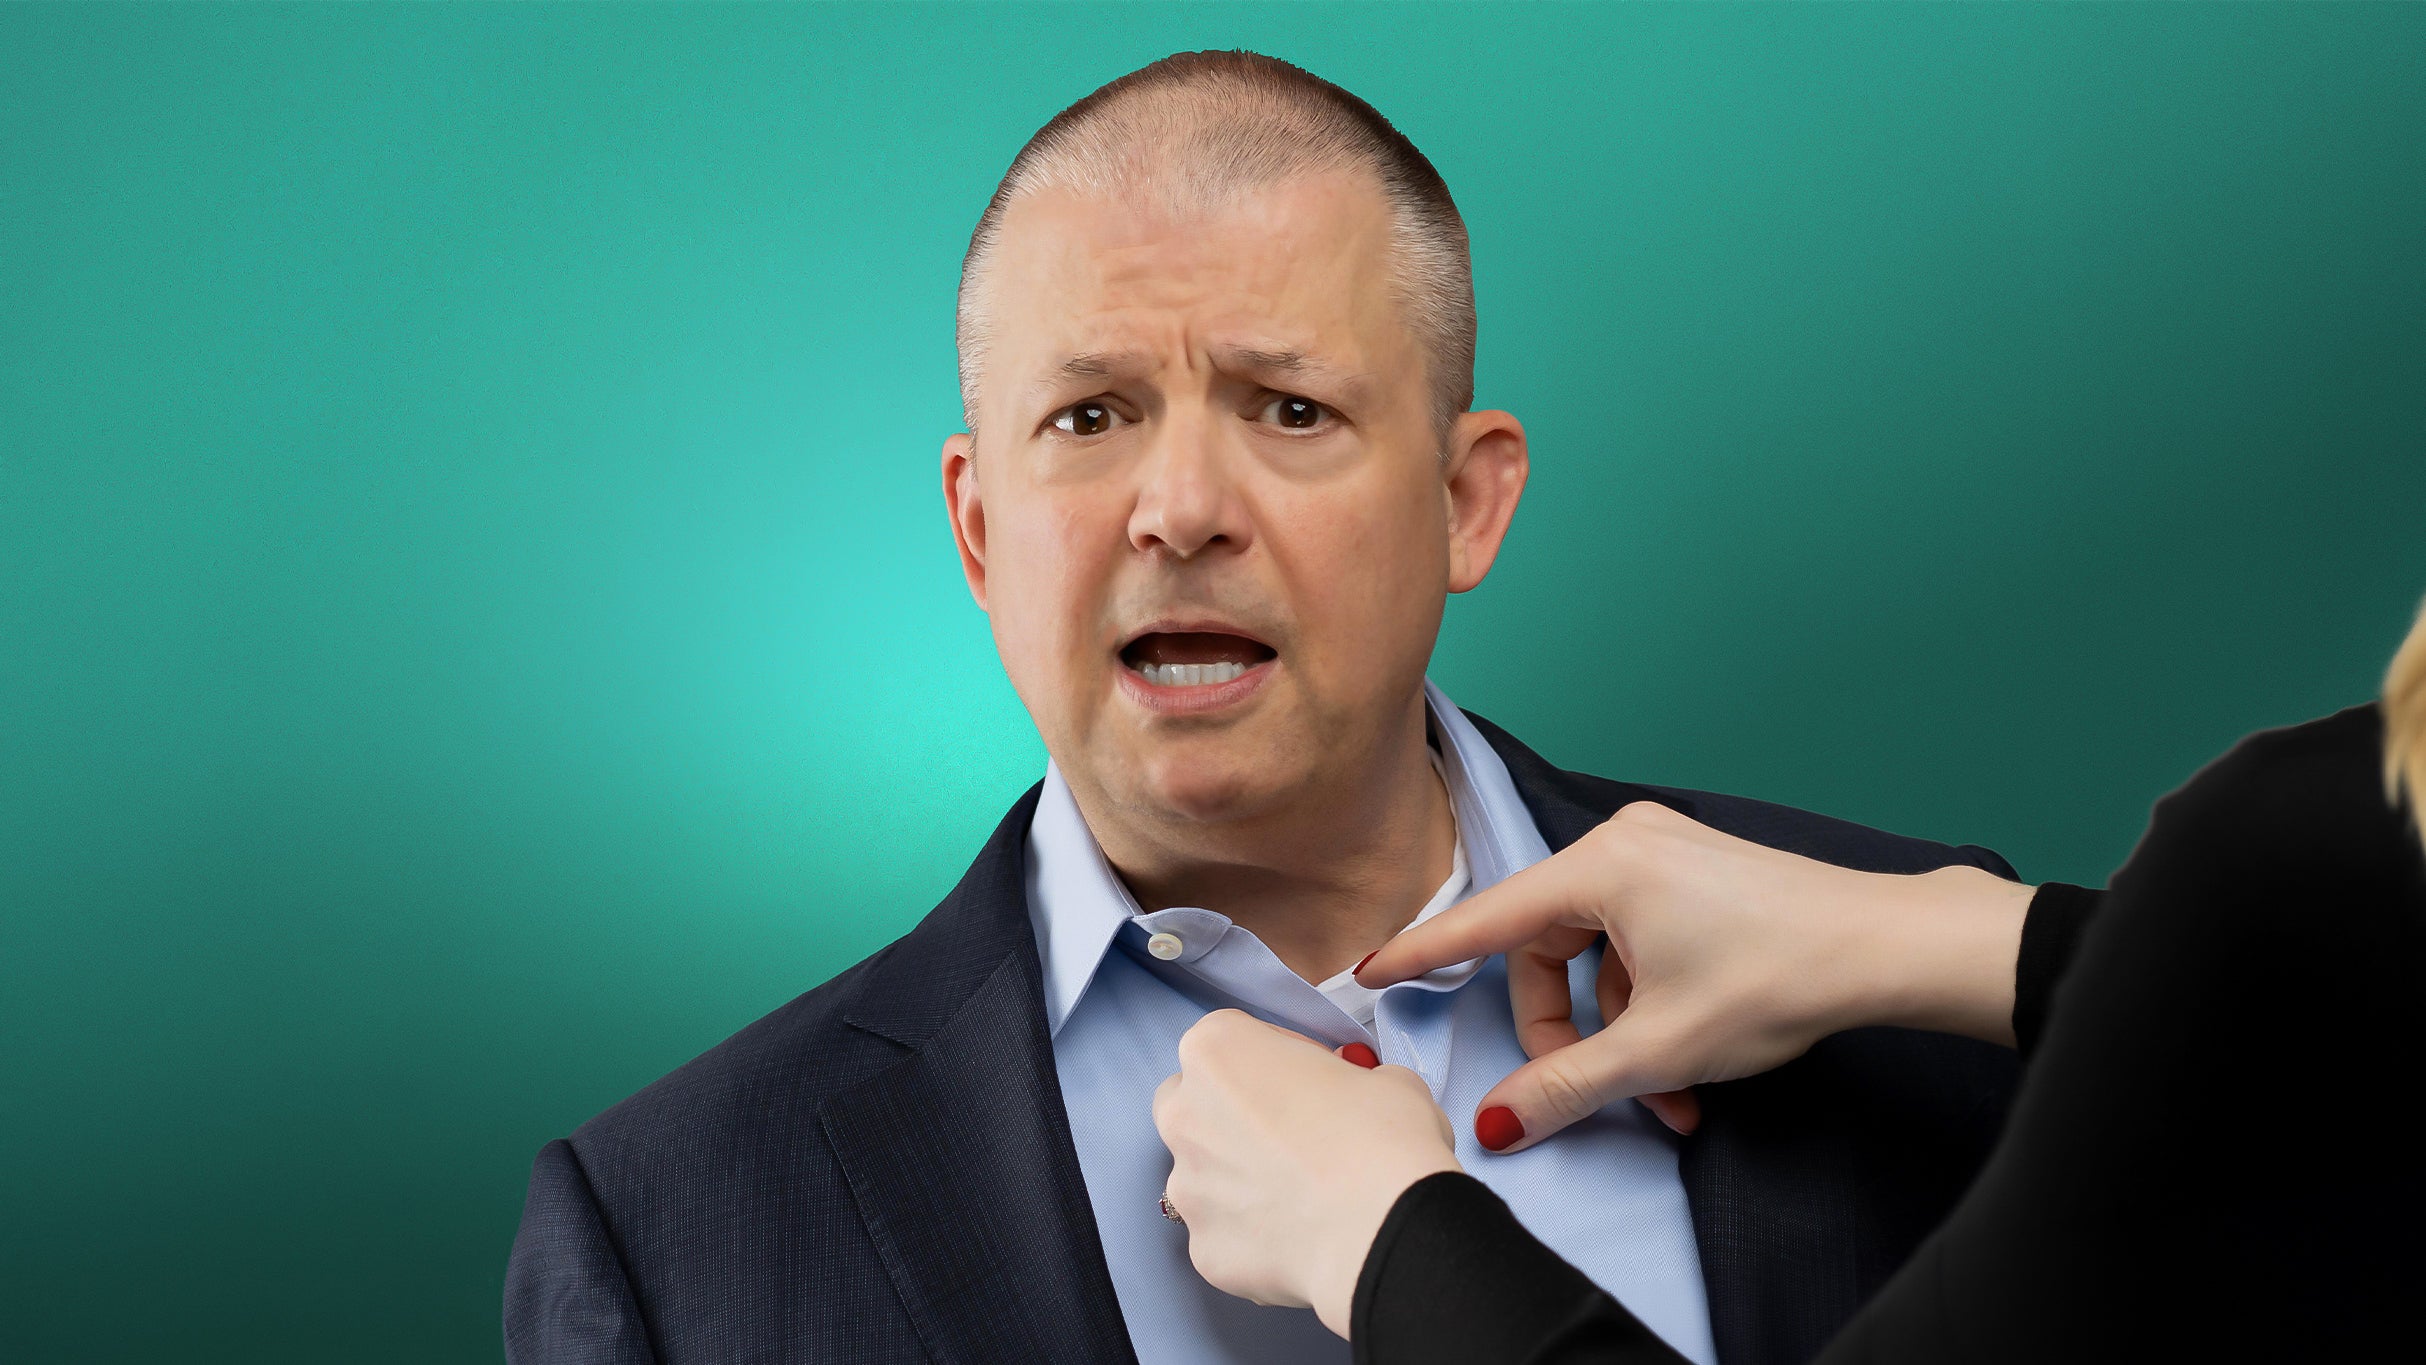 Jim Norton: Now You Know (Ages 18+) in Indianapolis promo photo for Official Platinum presale offer code